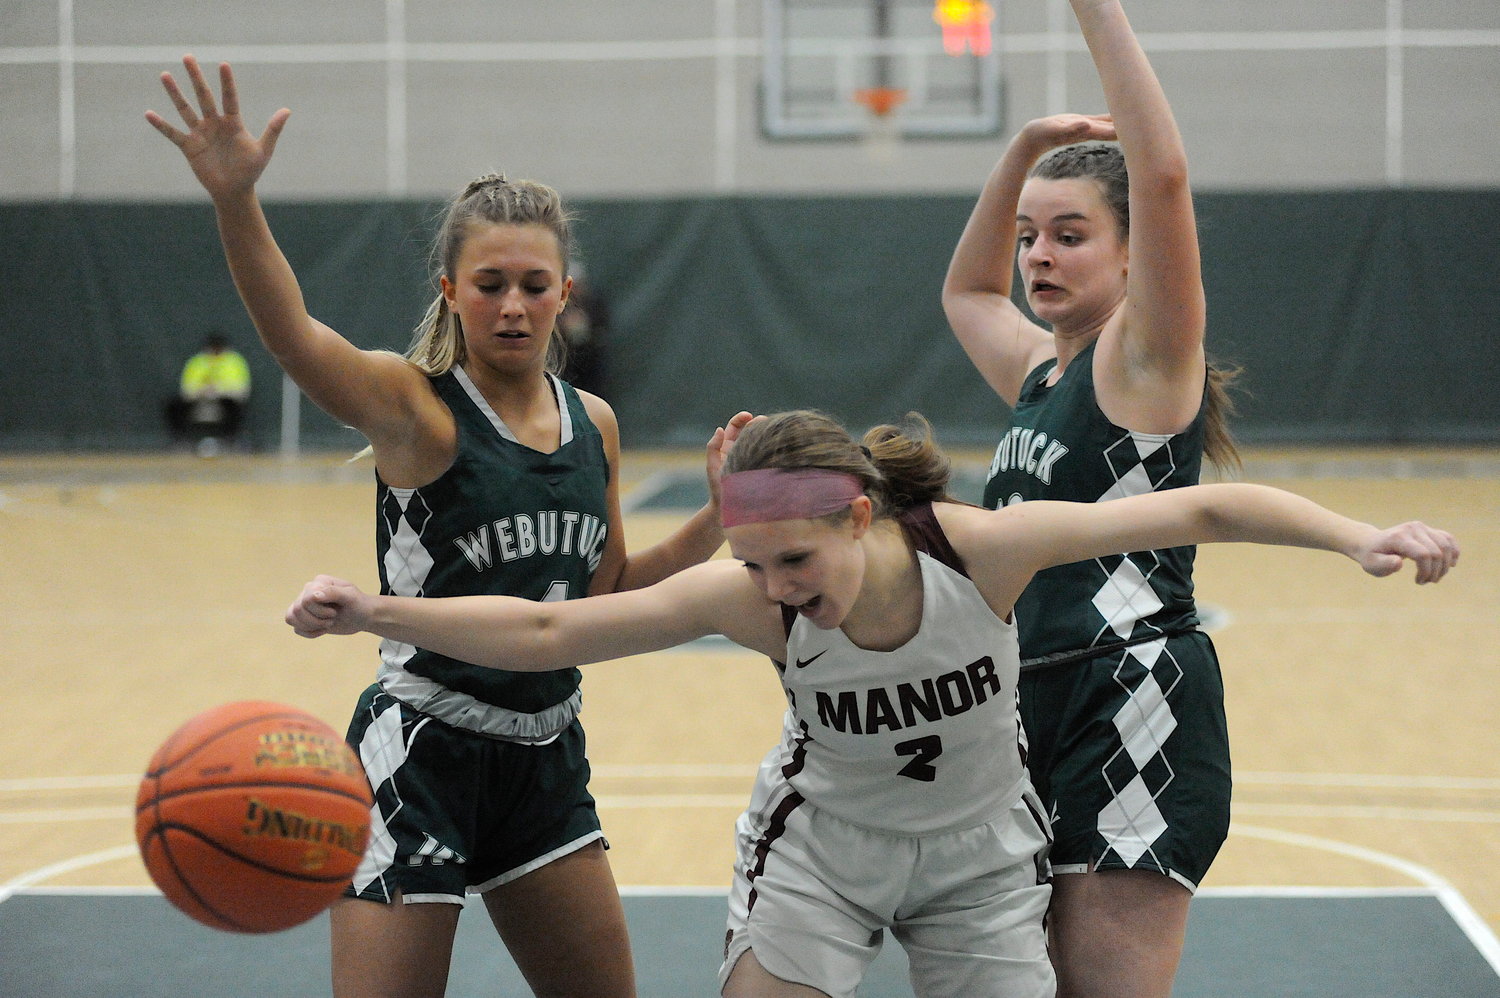 Just out of reach. Manor’s Mackenzie Carlson desperately   tries to reel in a pass headed for no man’s land, against Webutuck defenders Johanna Voight and Riley Thirlwall.